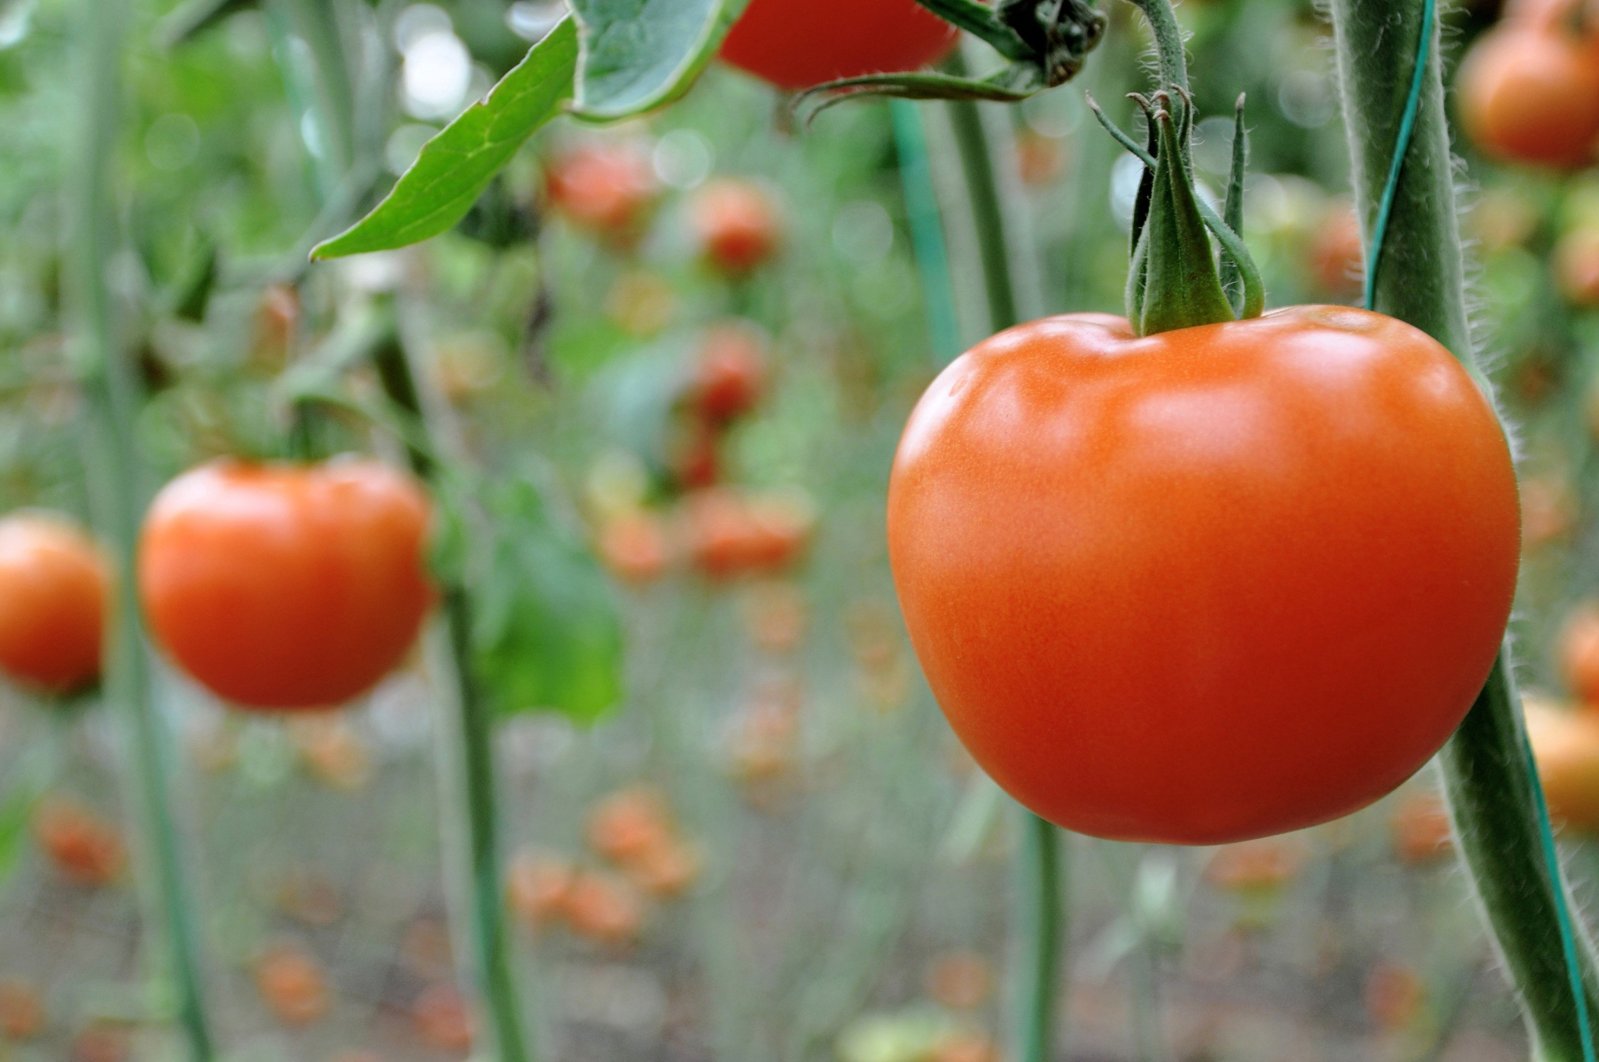 Turkey made $304.4 million from the exports of 535,000 tons of tomato in 2019. (IHA File Photo)